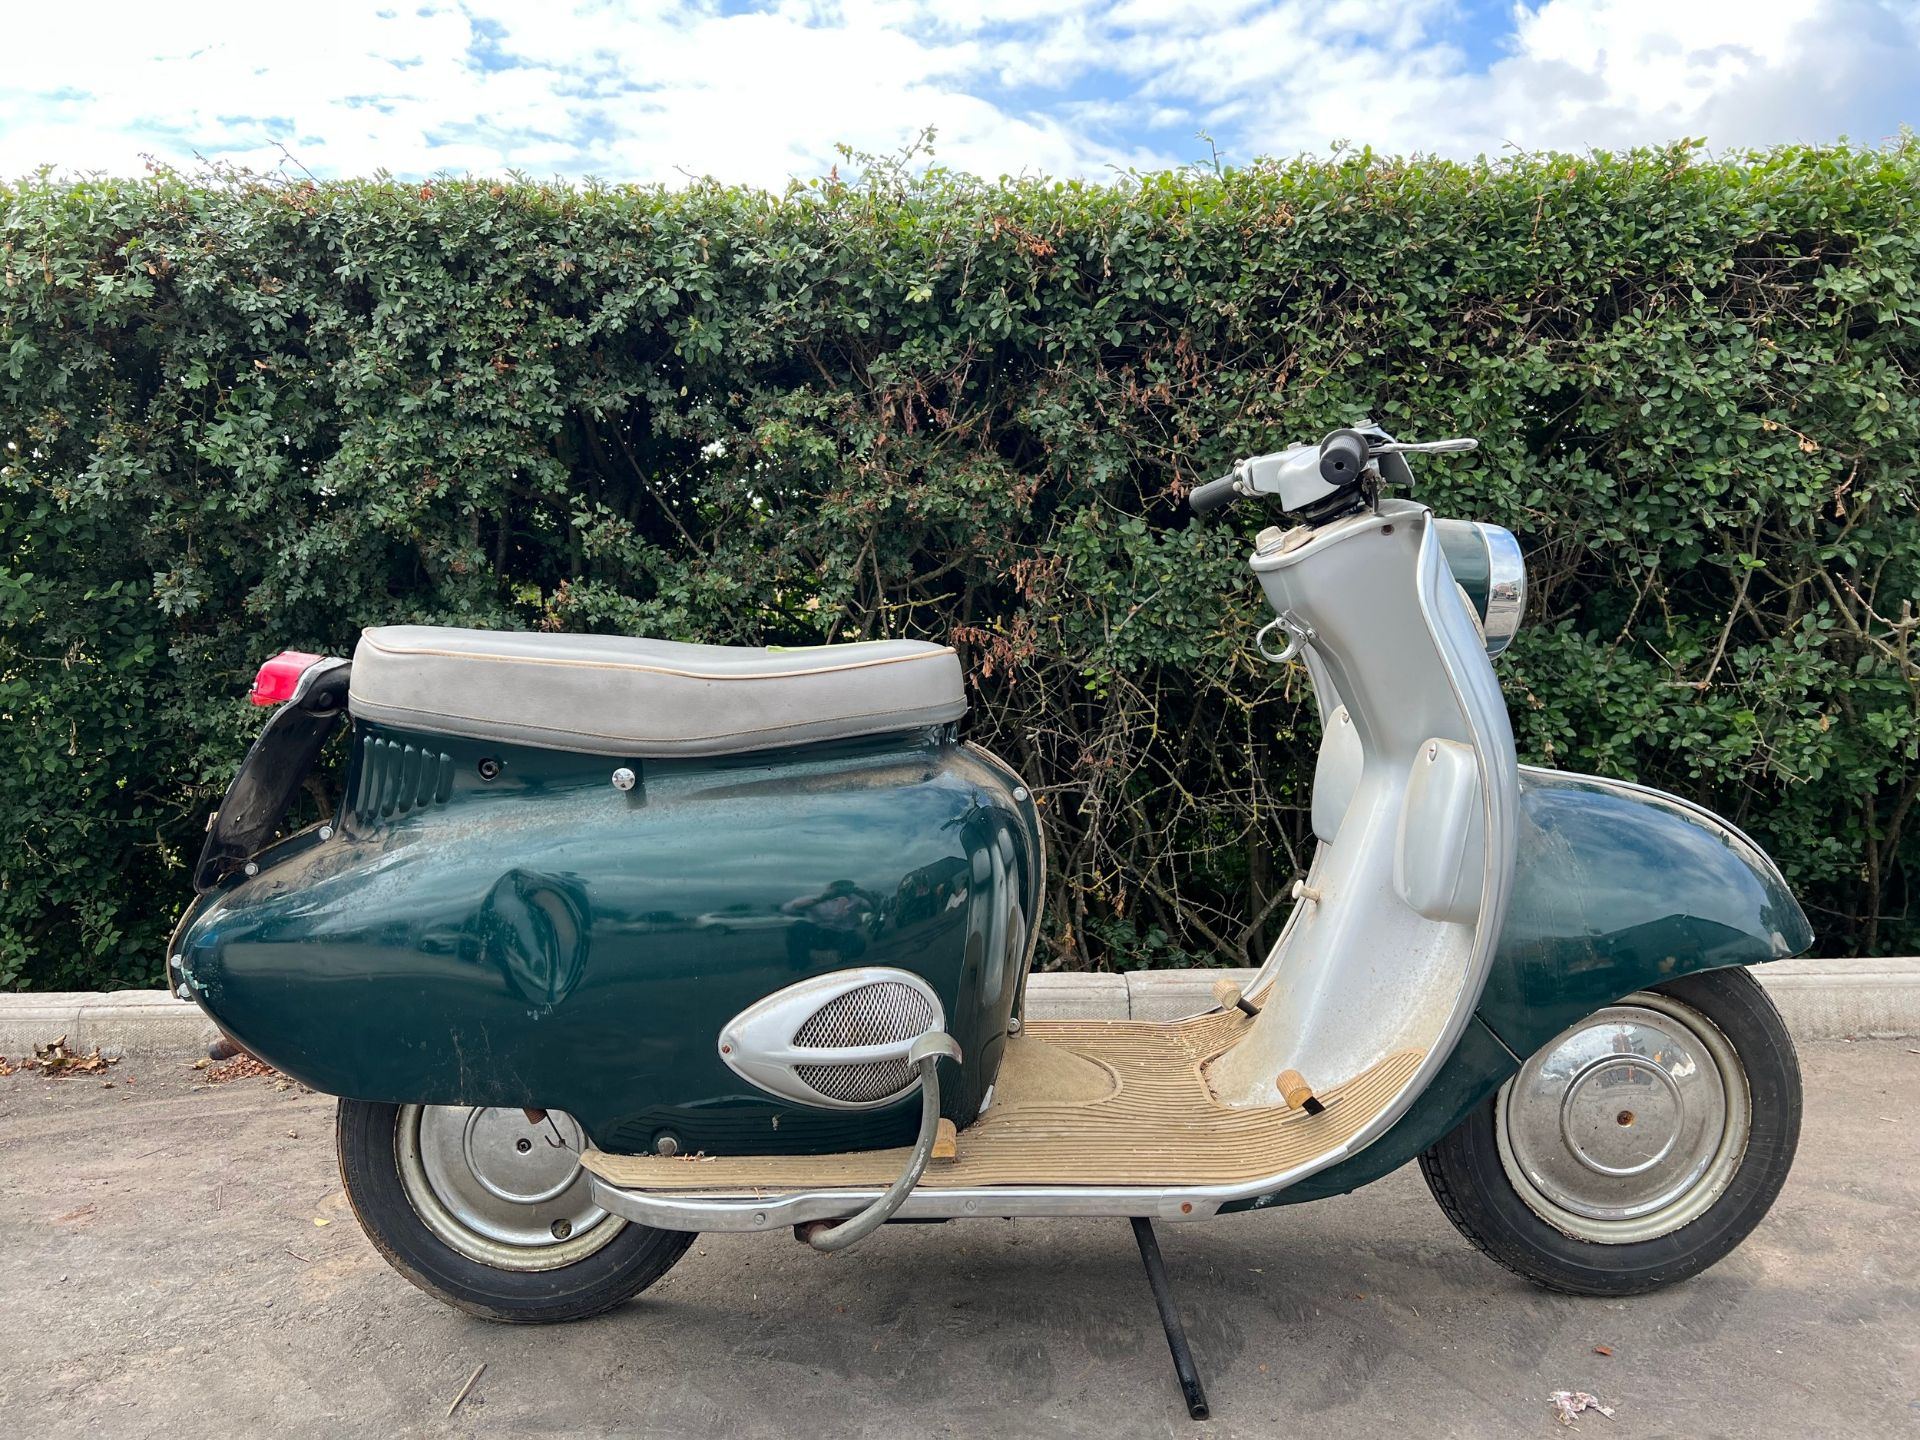 BSA Sunbeam Twin scooter. c1960s. 250cc Engine No. W14076 Engine turns over. American import No docs